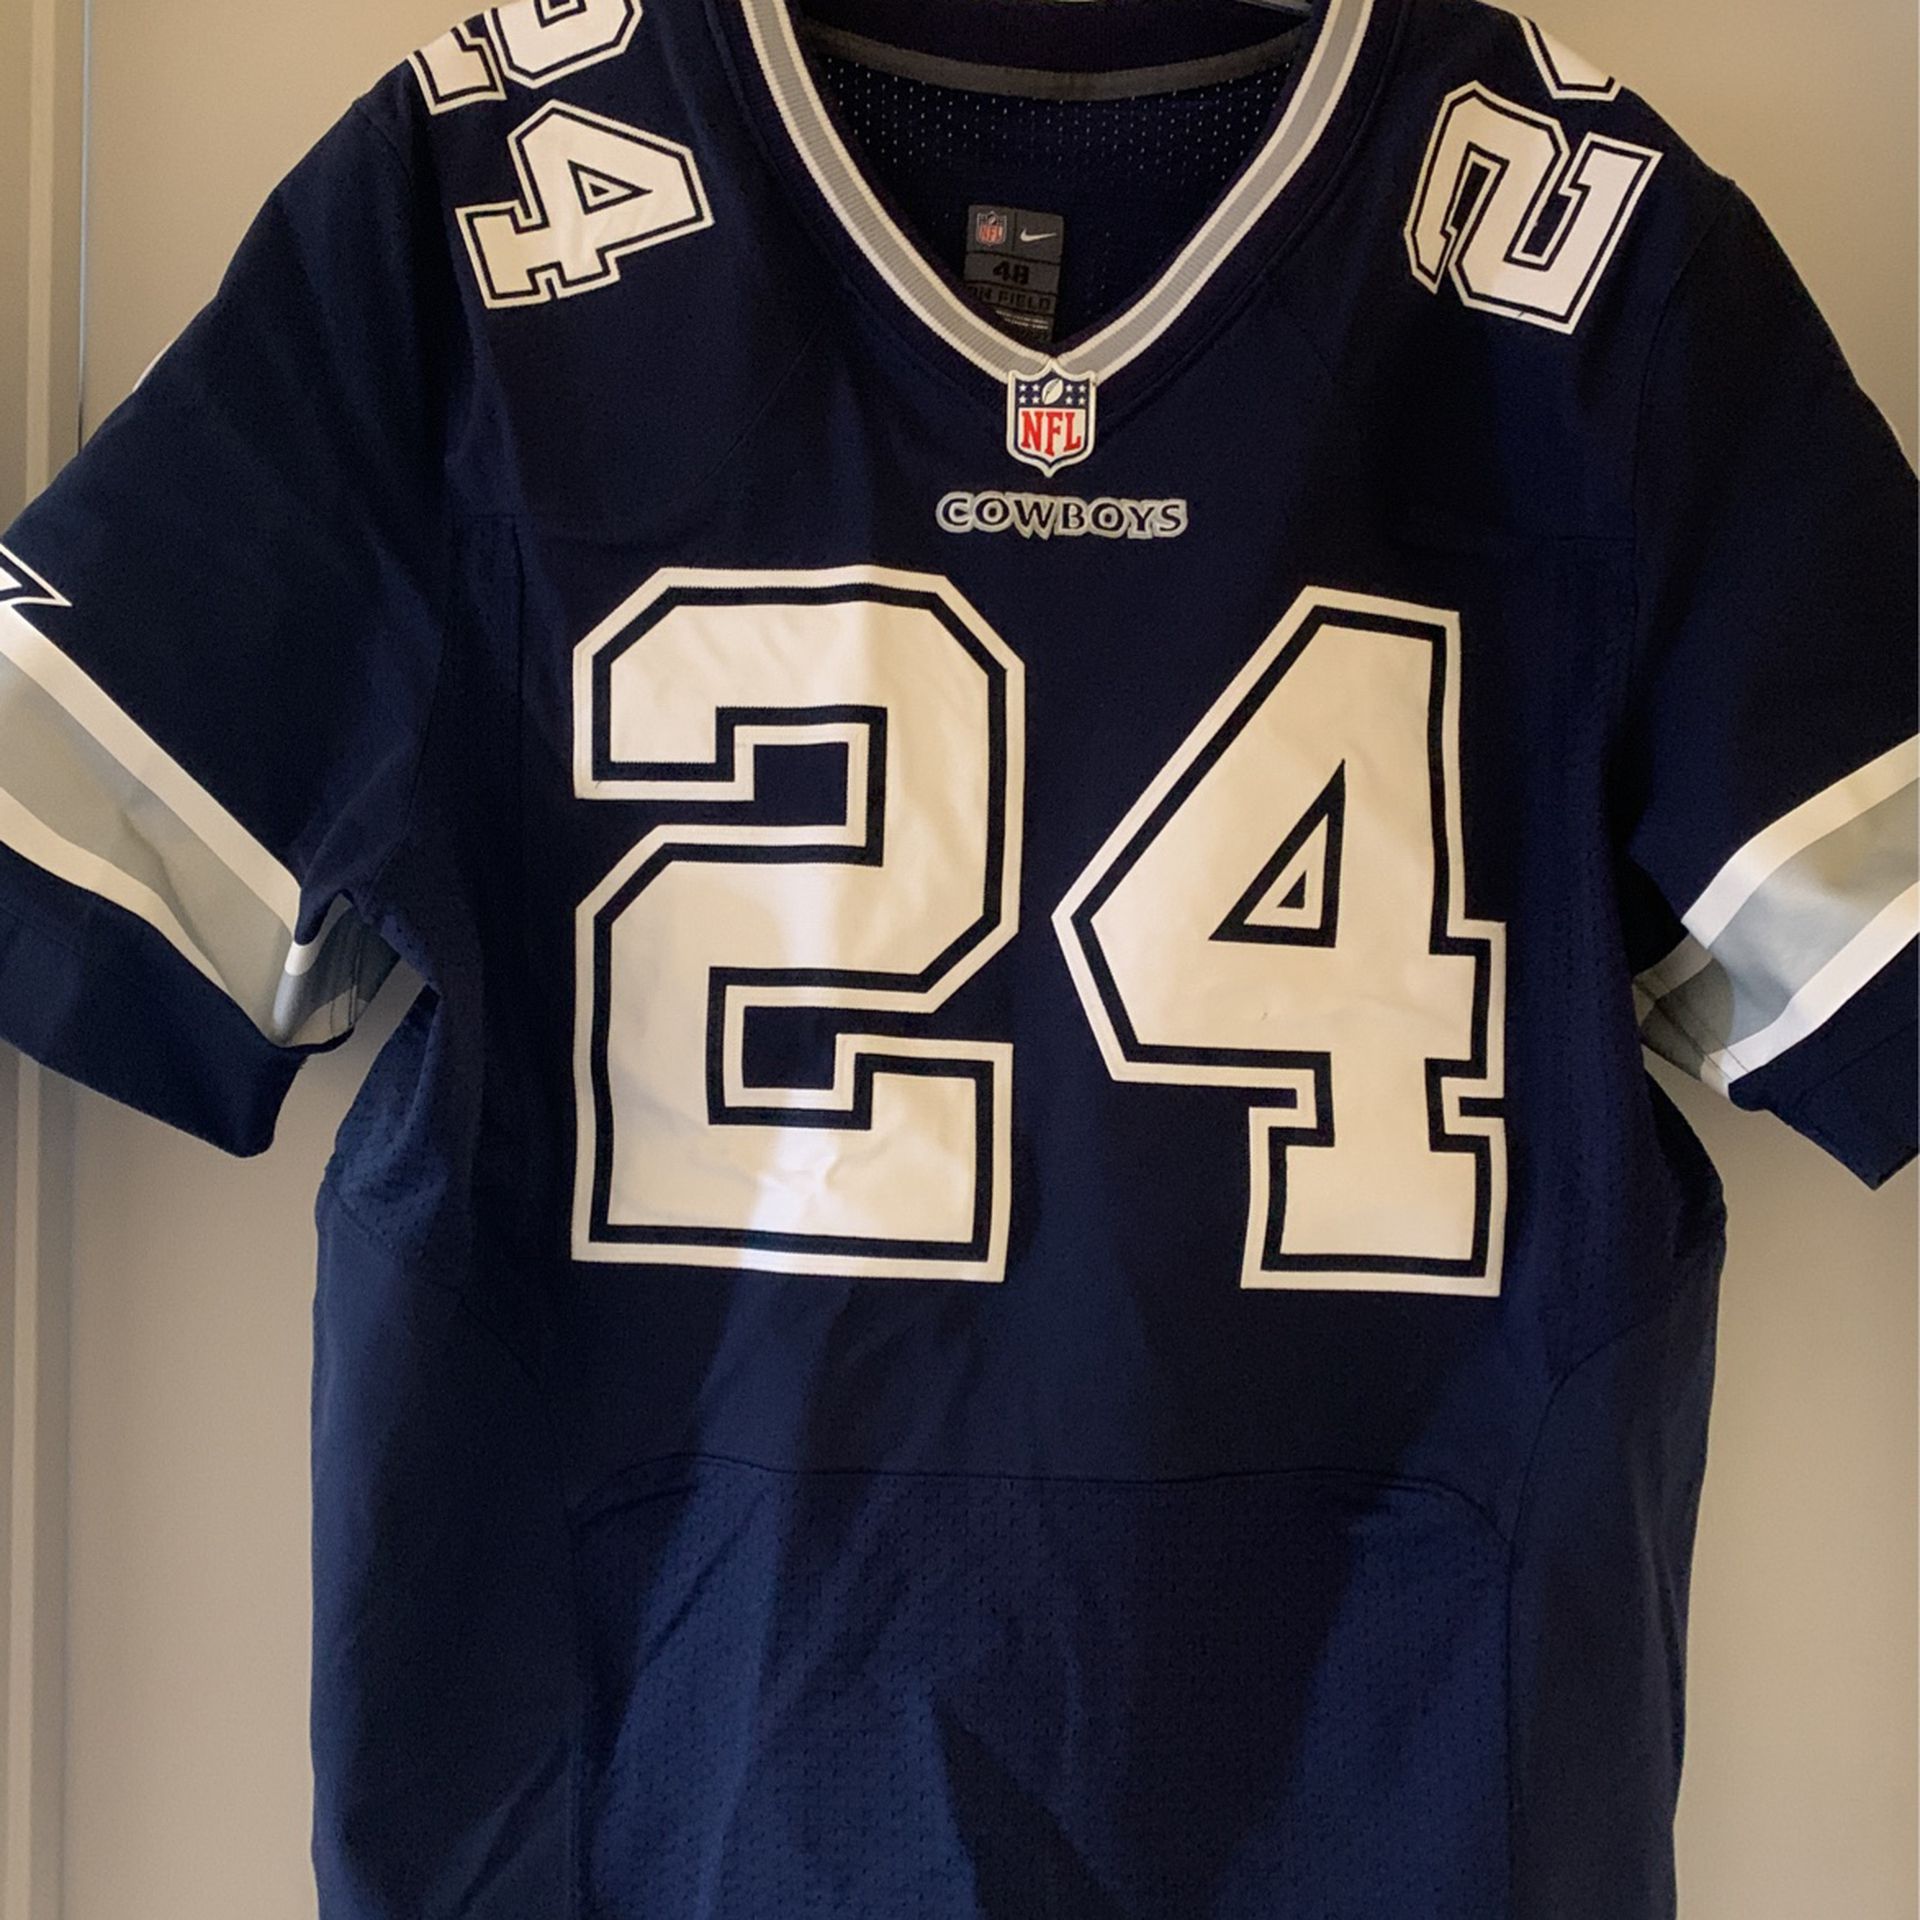 Used Authentic Nike Elite Cowboys Football Jersey for Sale in Lancaster, CA  - OfferUp